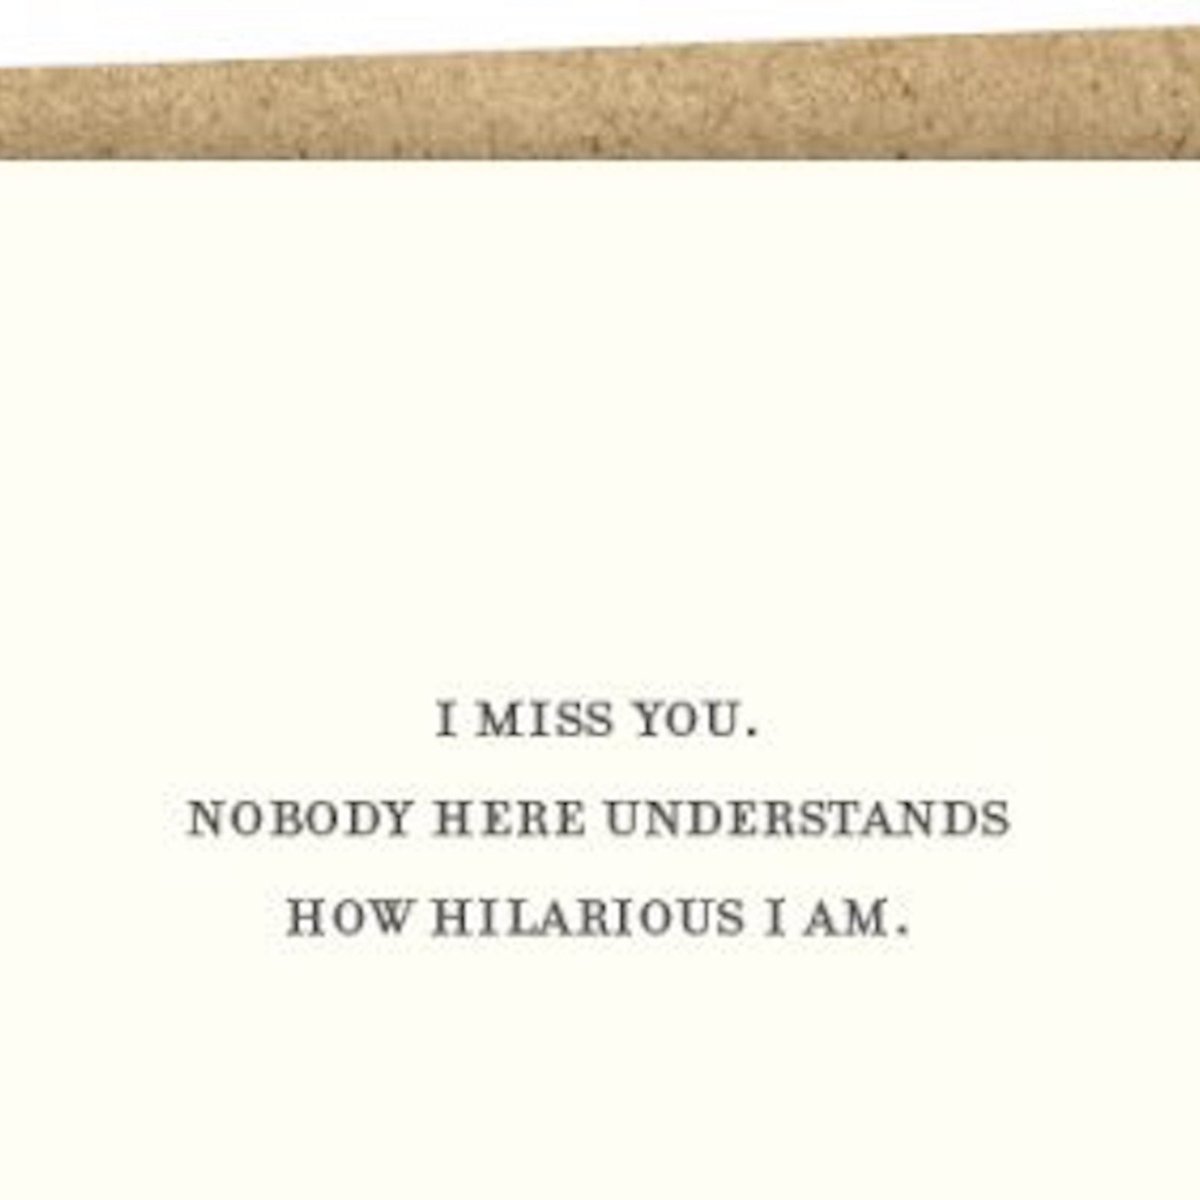 Kraft card with black text that reads: "I MISS YOU. NOBODY HERE UNDERSTANDS HOW HILARIOUS I AM." Comes with a brown Kraft envelope. Designed by Sapling Press and made in Pittsburgh, PA.